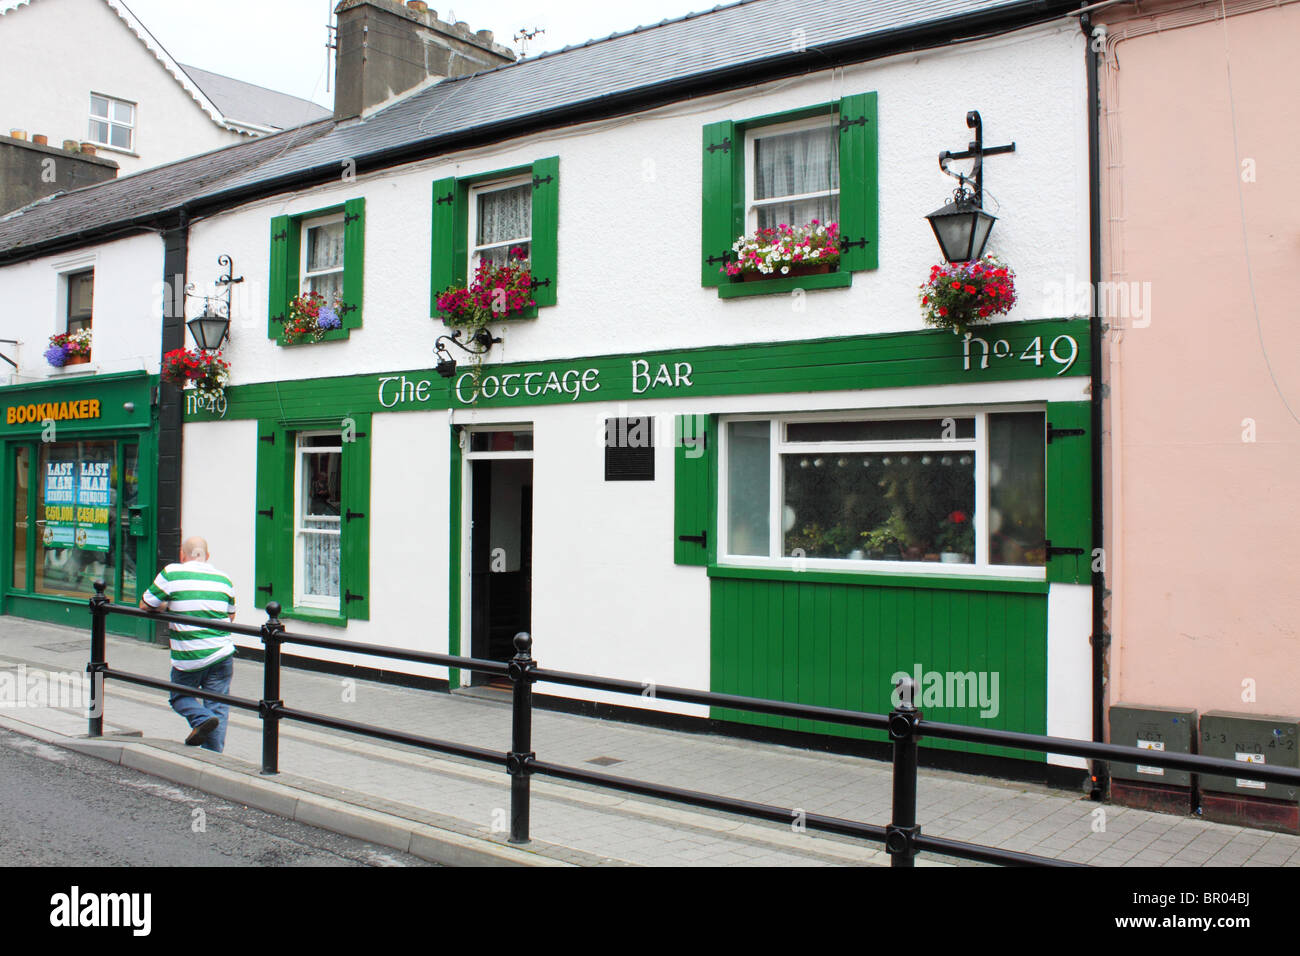 Der Cottage-Bar in Letterkenny, County Donegal, Irland Stockfoto